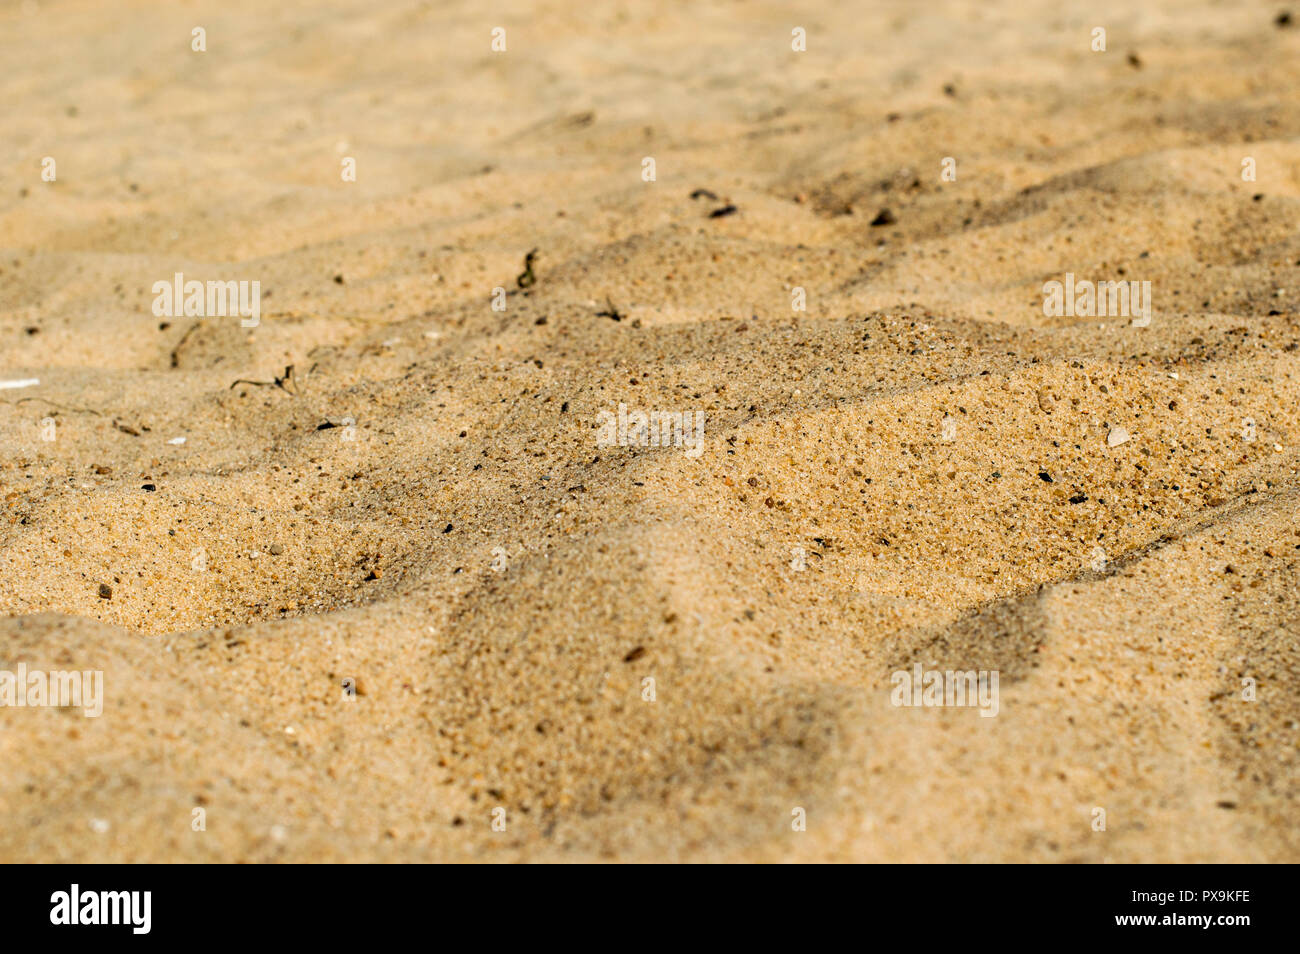 Volga river. Summer, sunny day. The wave rushes to the sandy beach. Foam and bubbles. Close-up. Russia. Stock Photo